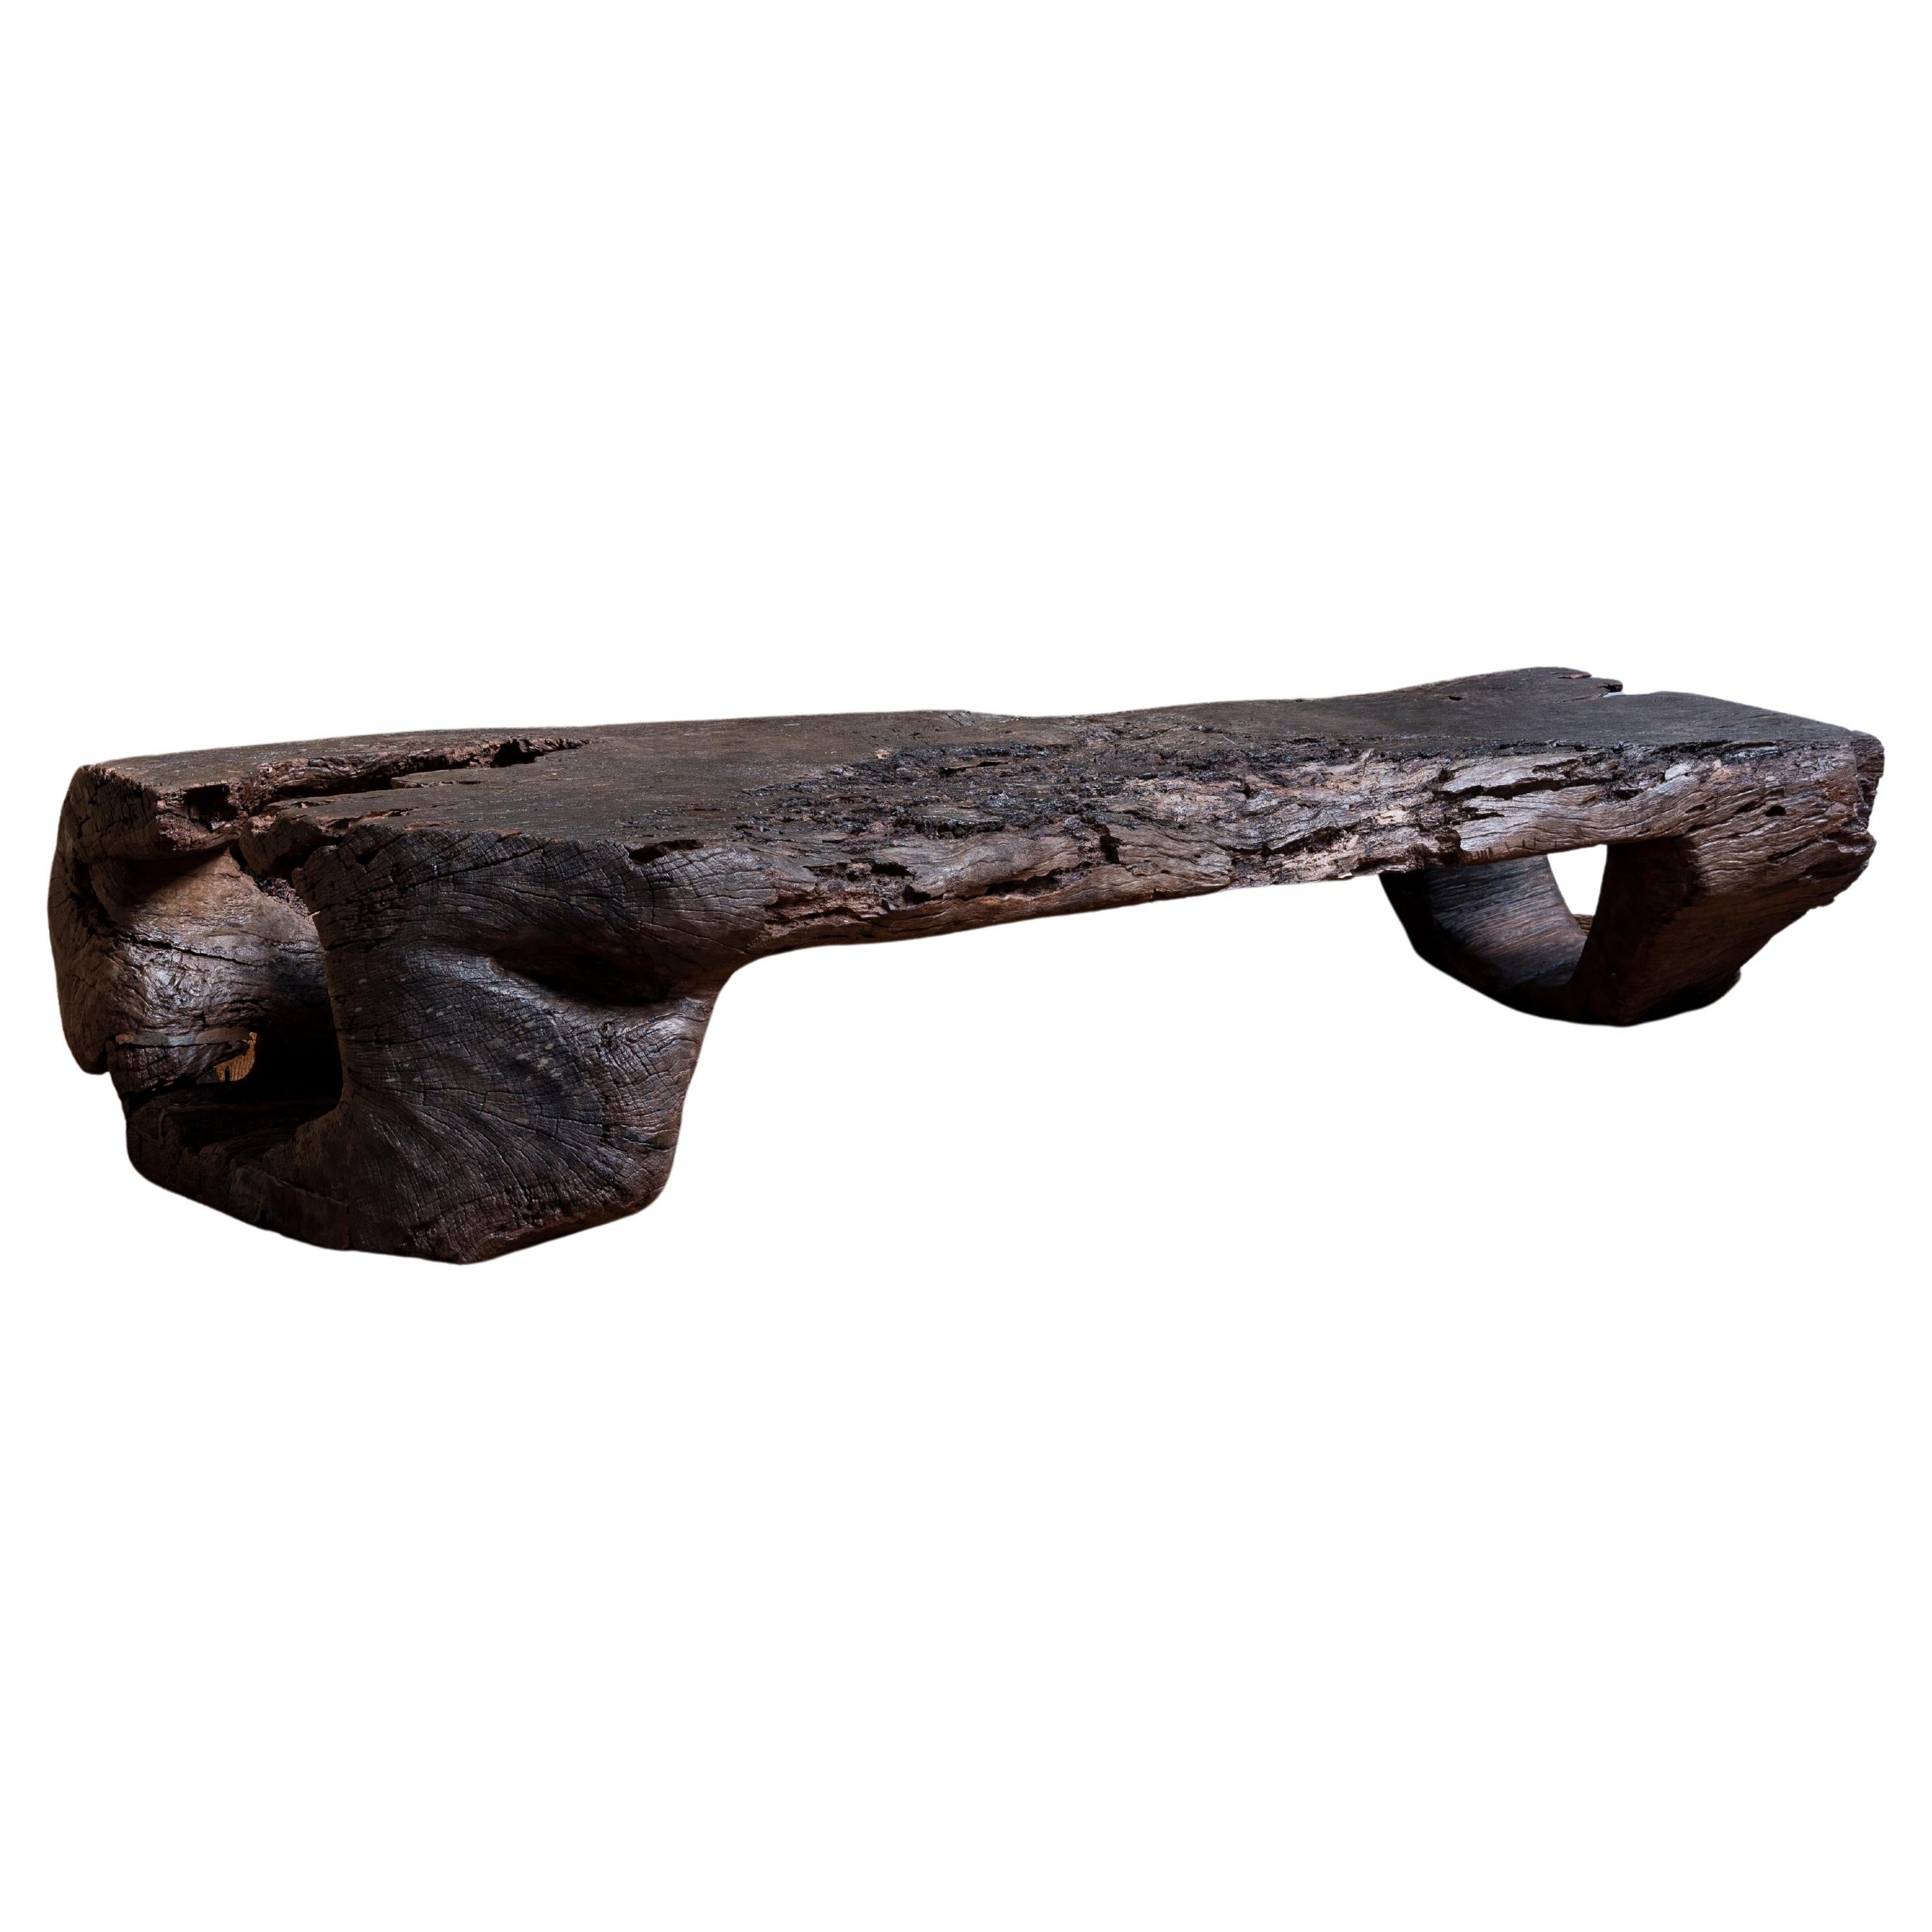 Primitive Live Edge Coffee Table from France